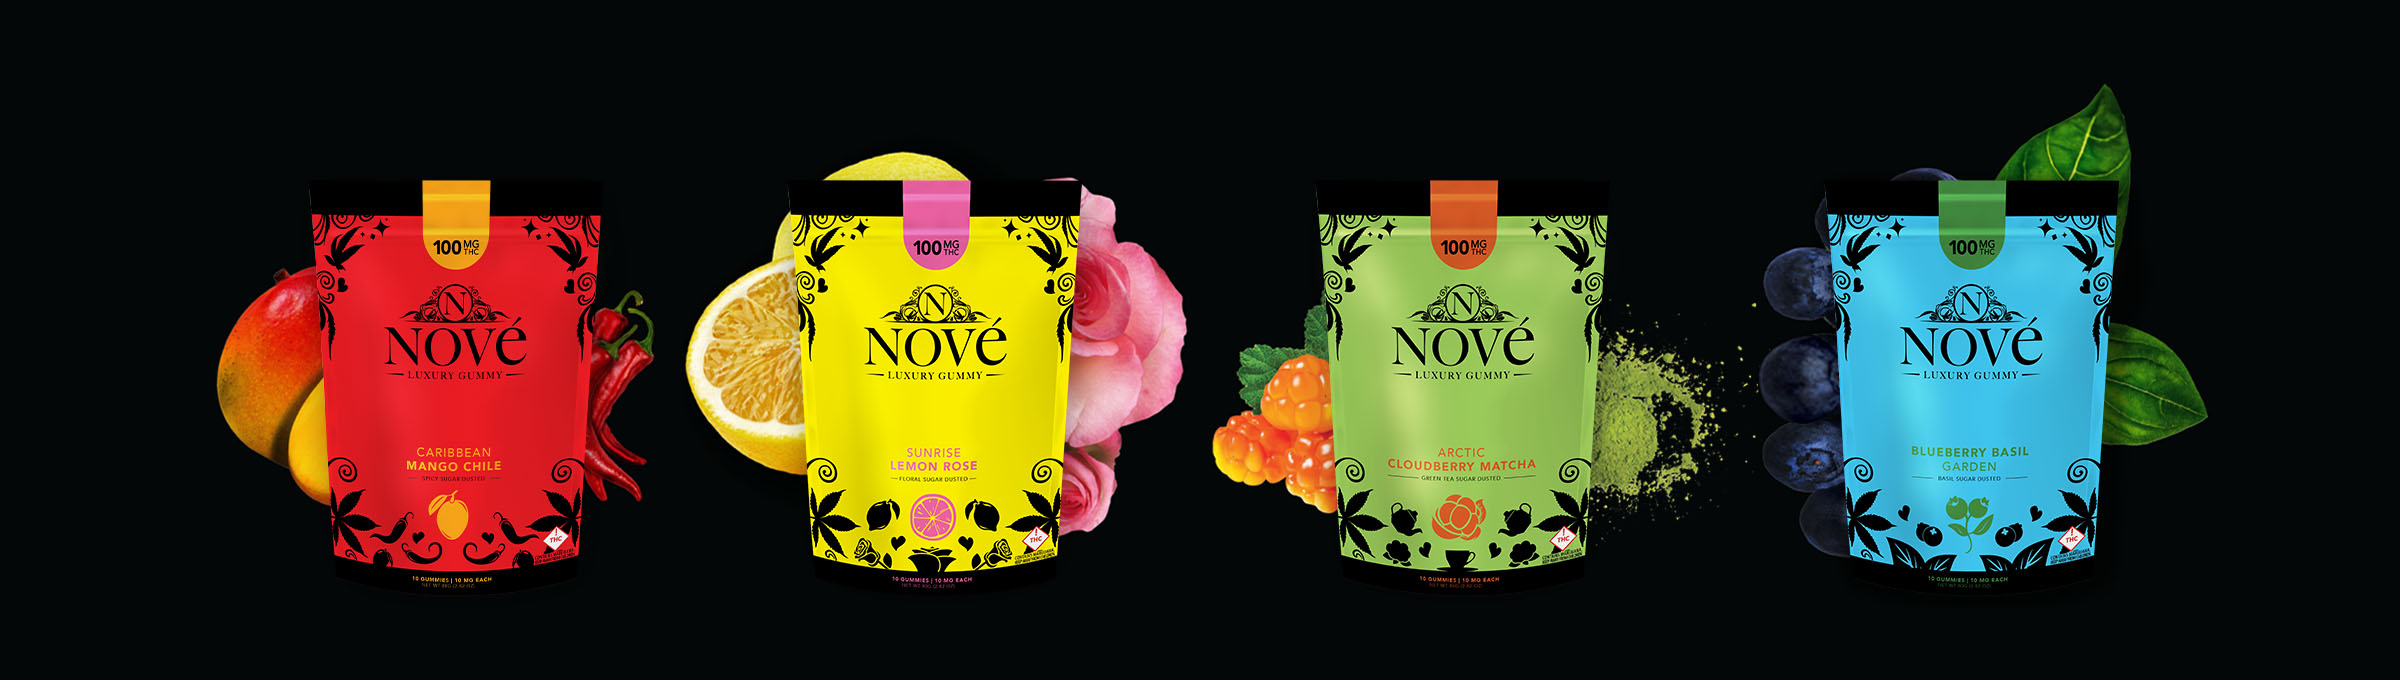 Four flavors of Nové Luxury Cannabis Gummies on a black background, pictured with their associated ingredients.